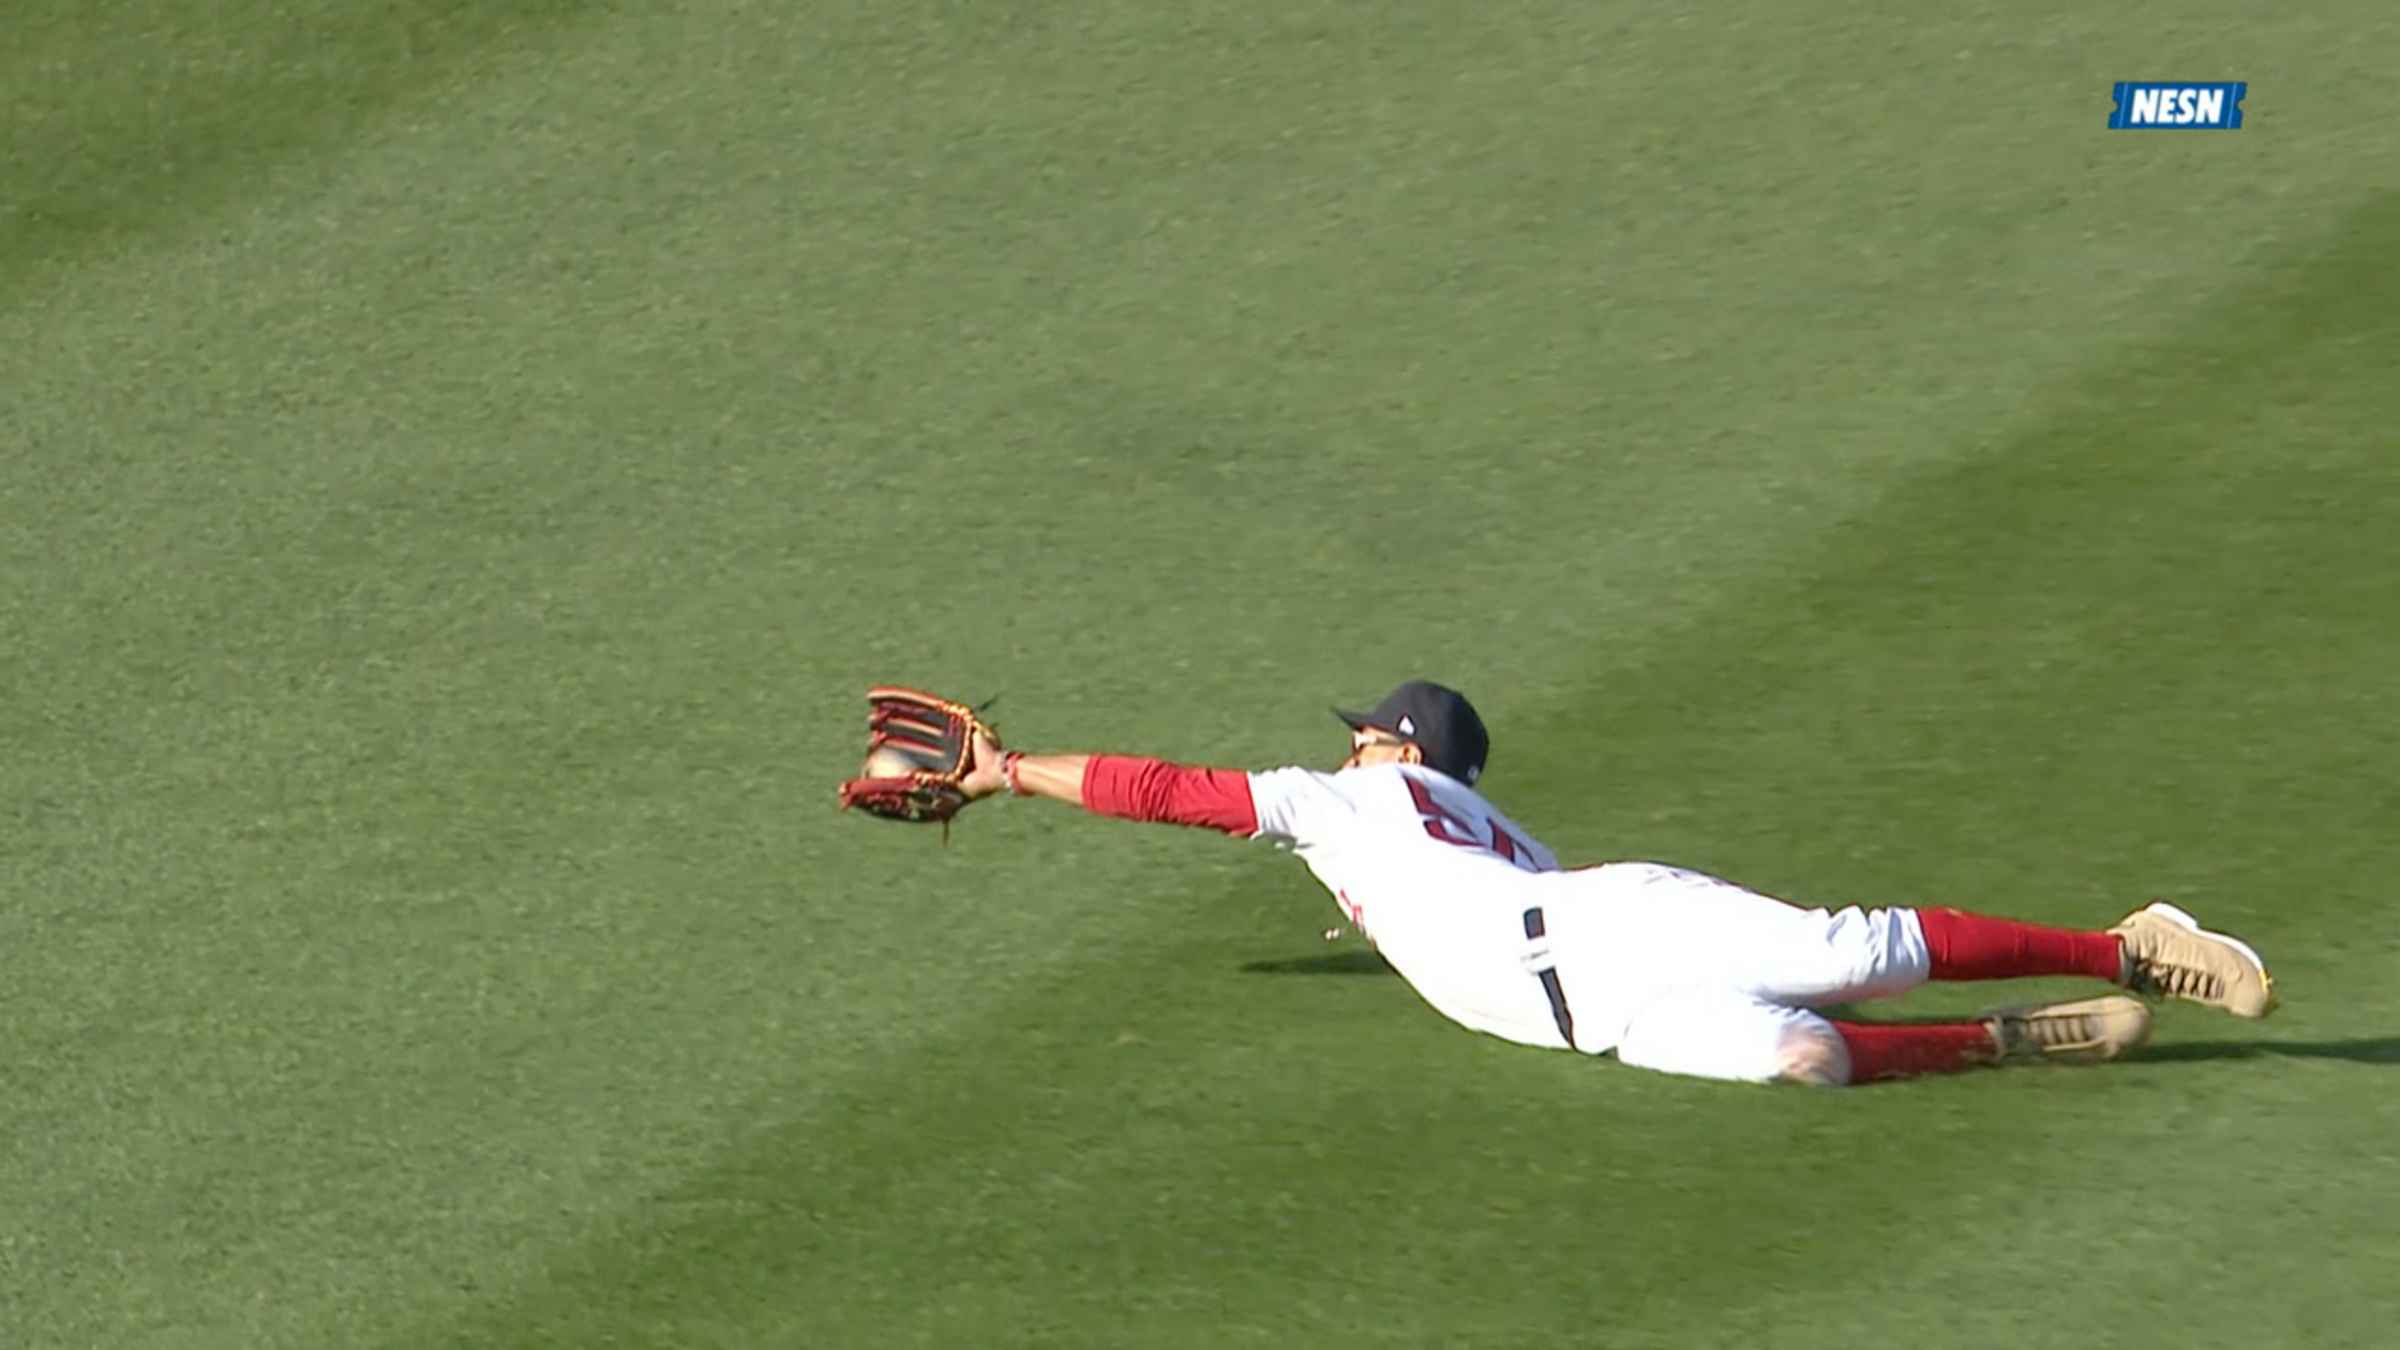 Mookie Betts' diving catch, Dodgers win. : r/baseball